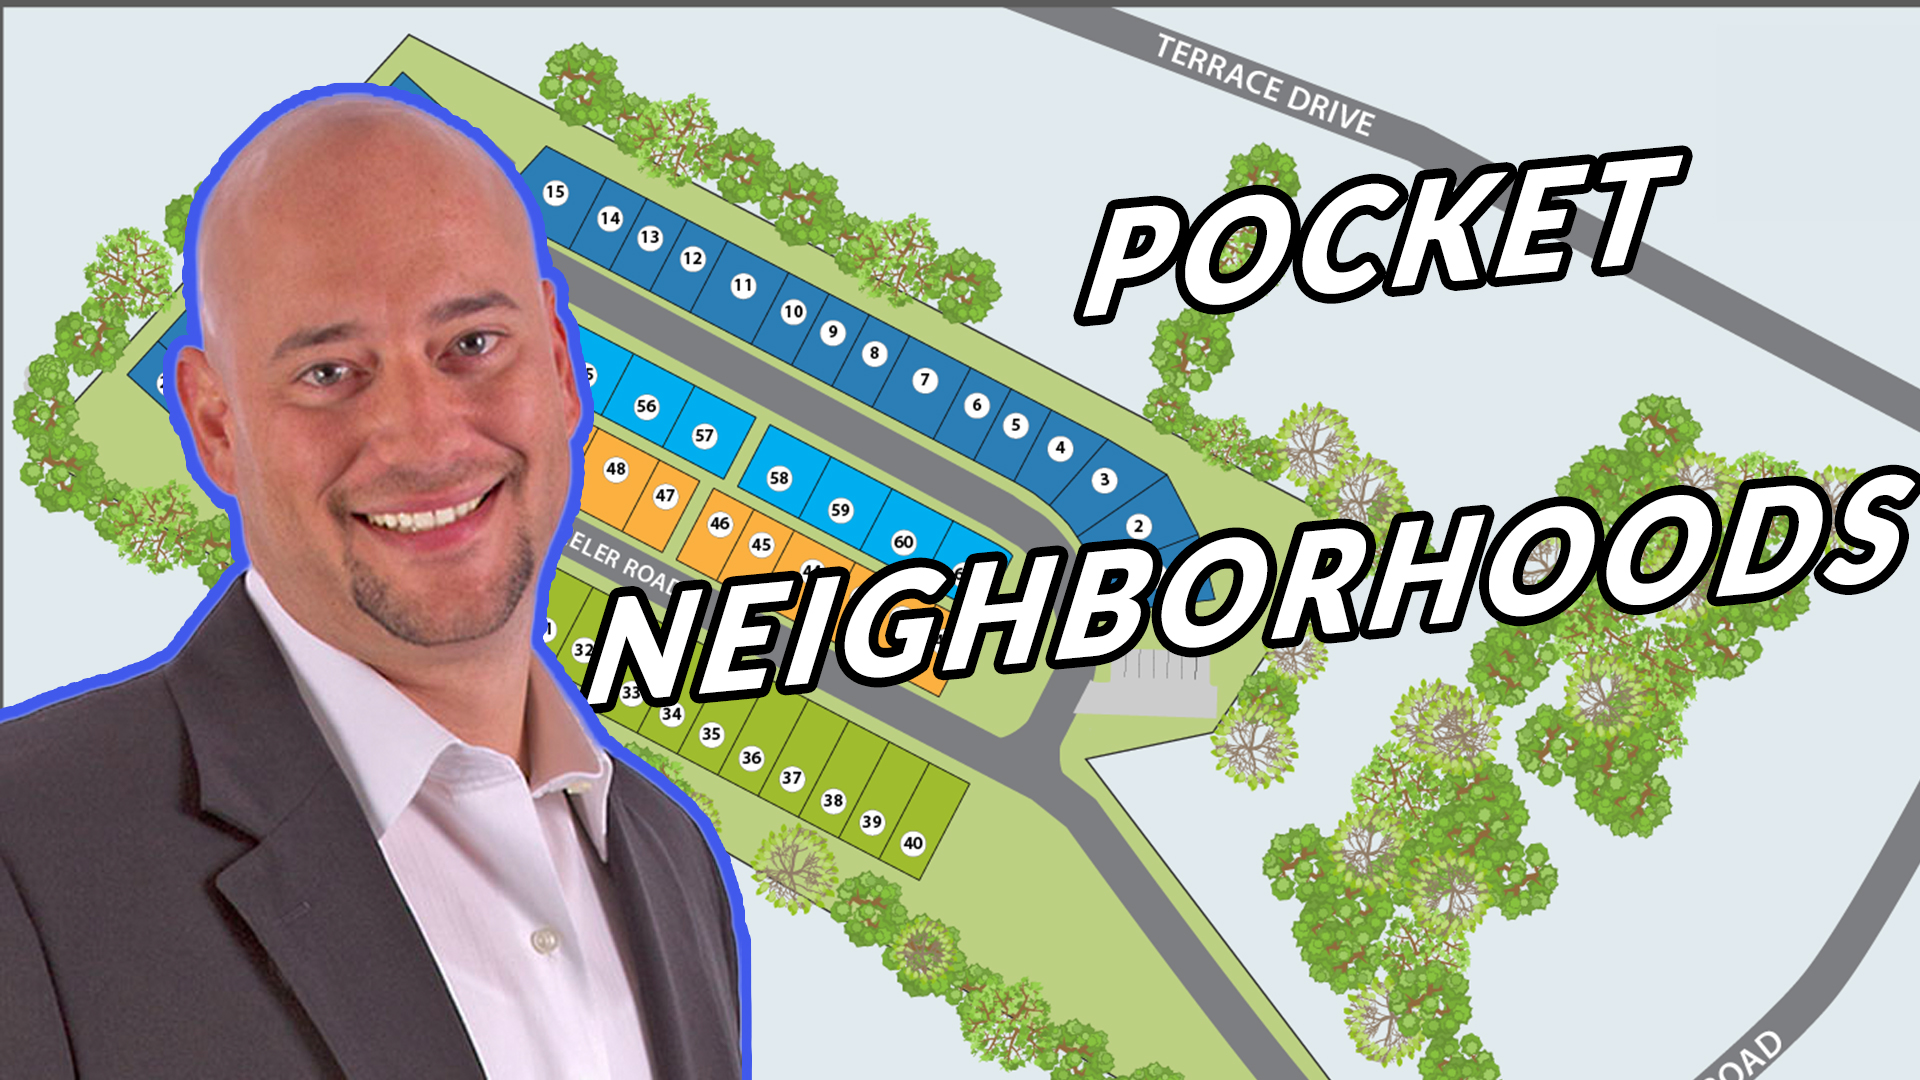 You are currently viewing Pocket Neighborhoods